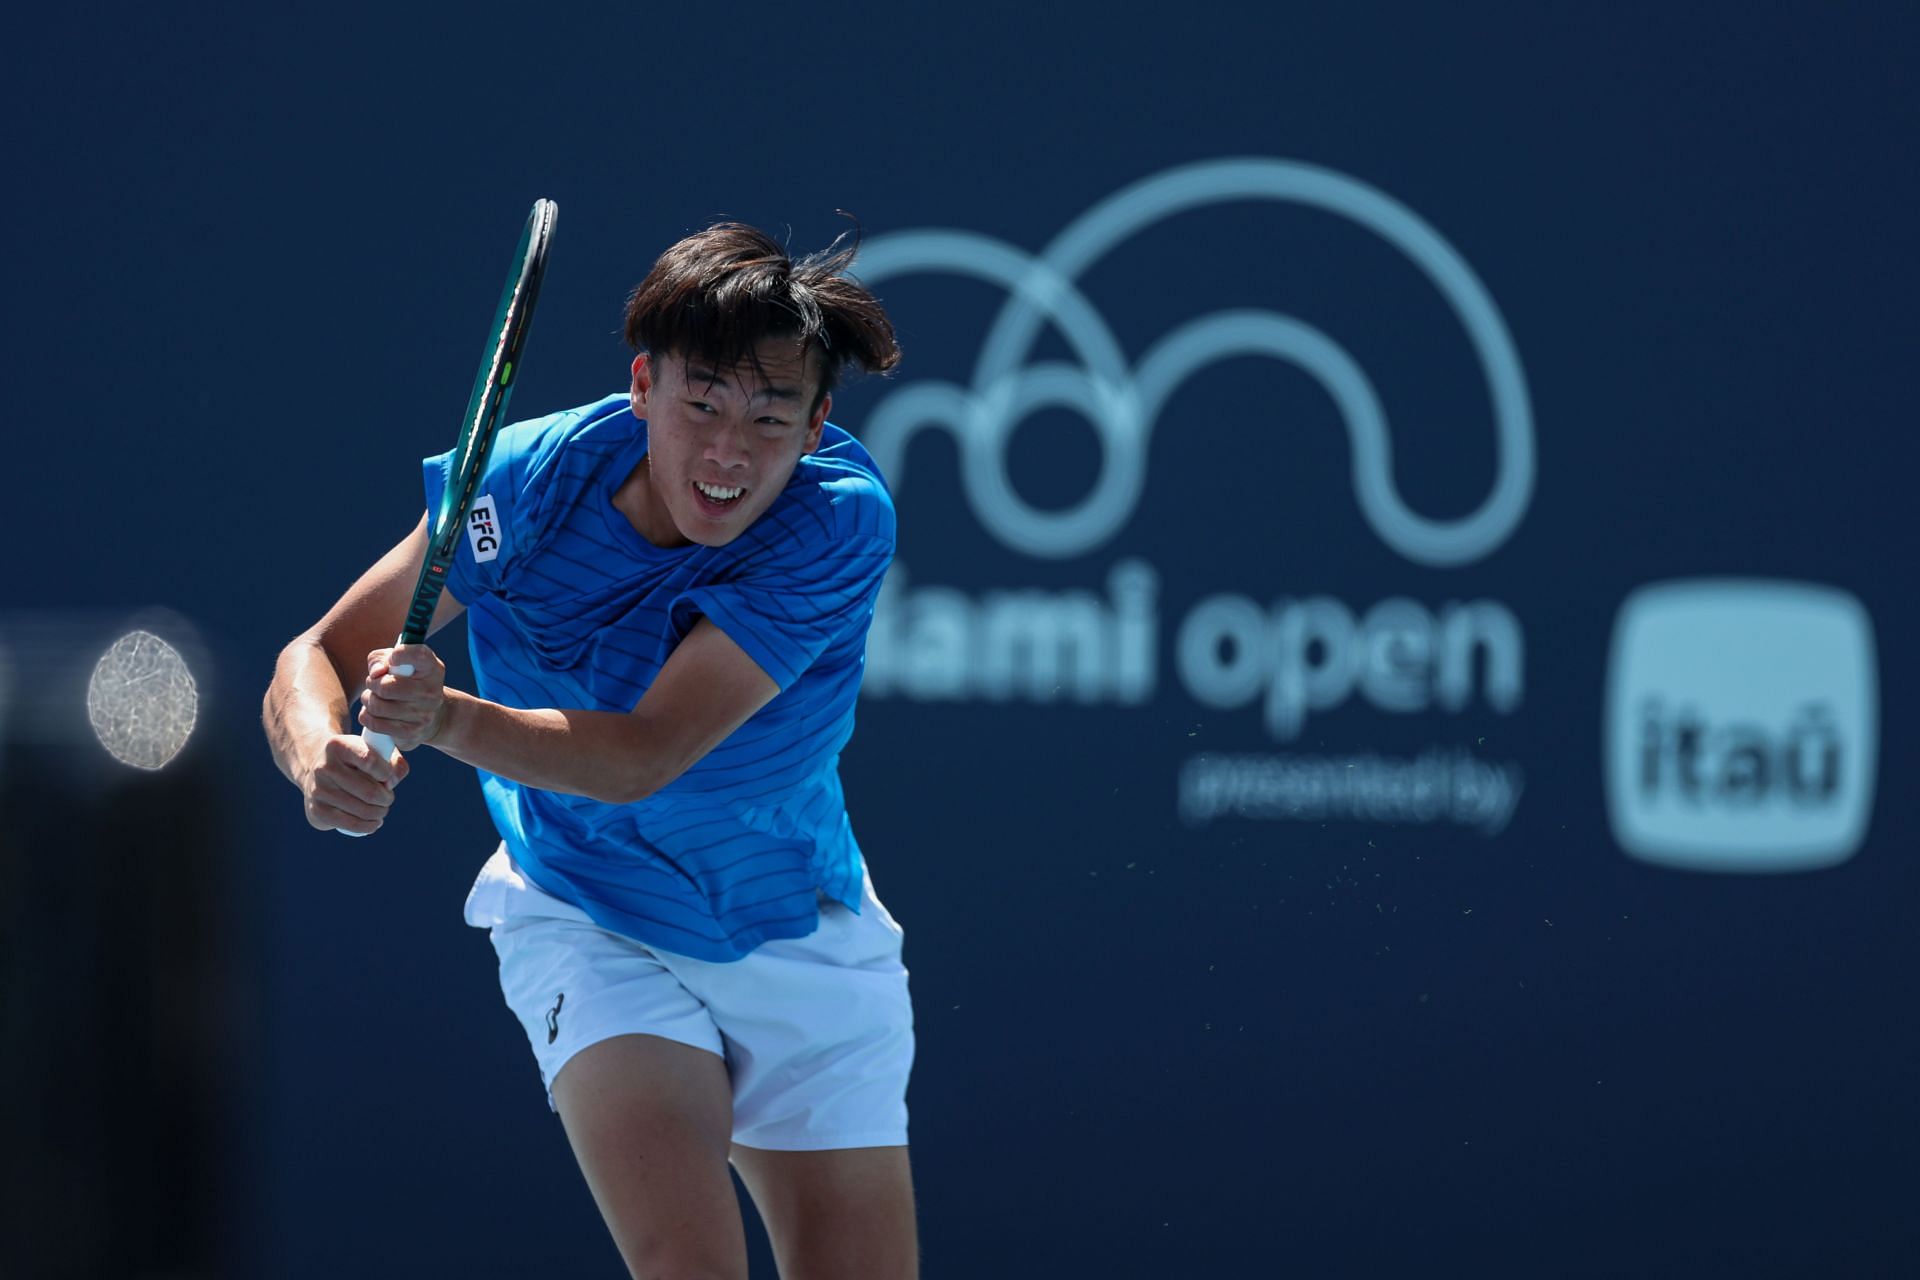 Rafael Nadal Academy player Coleman Wong makes history, becomes first player ever from Hong Kong to reach main draw of Masters 1000 event